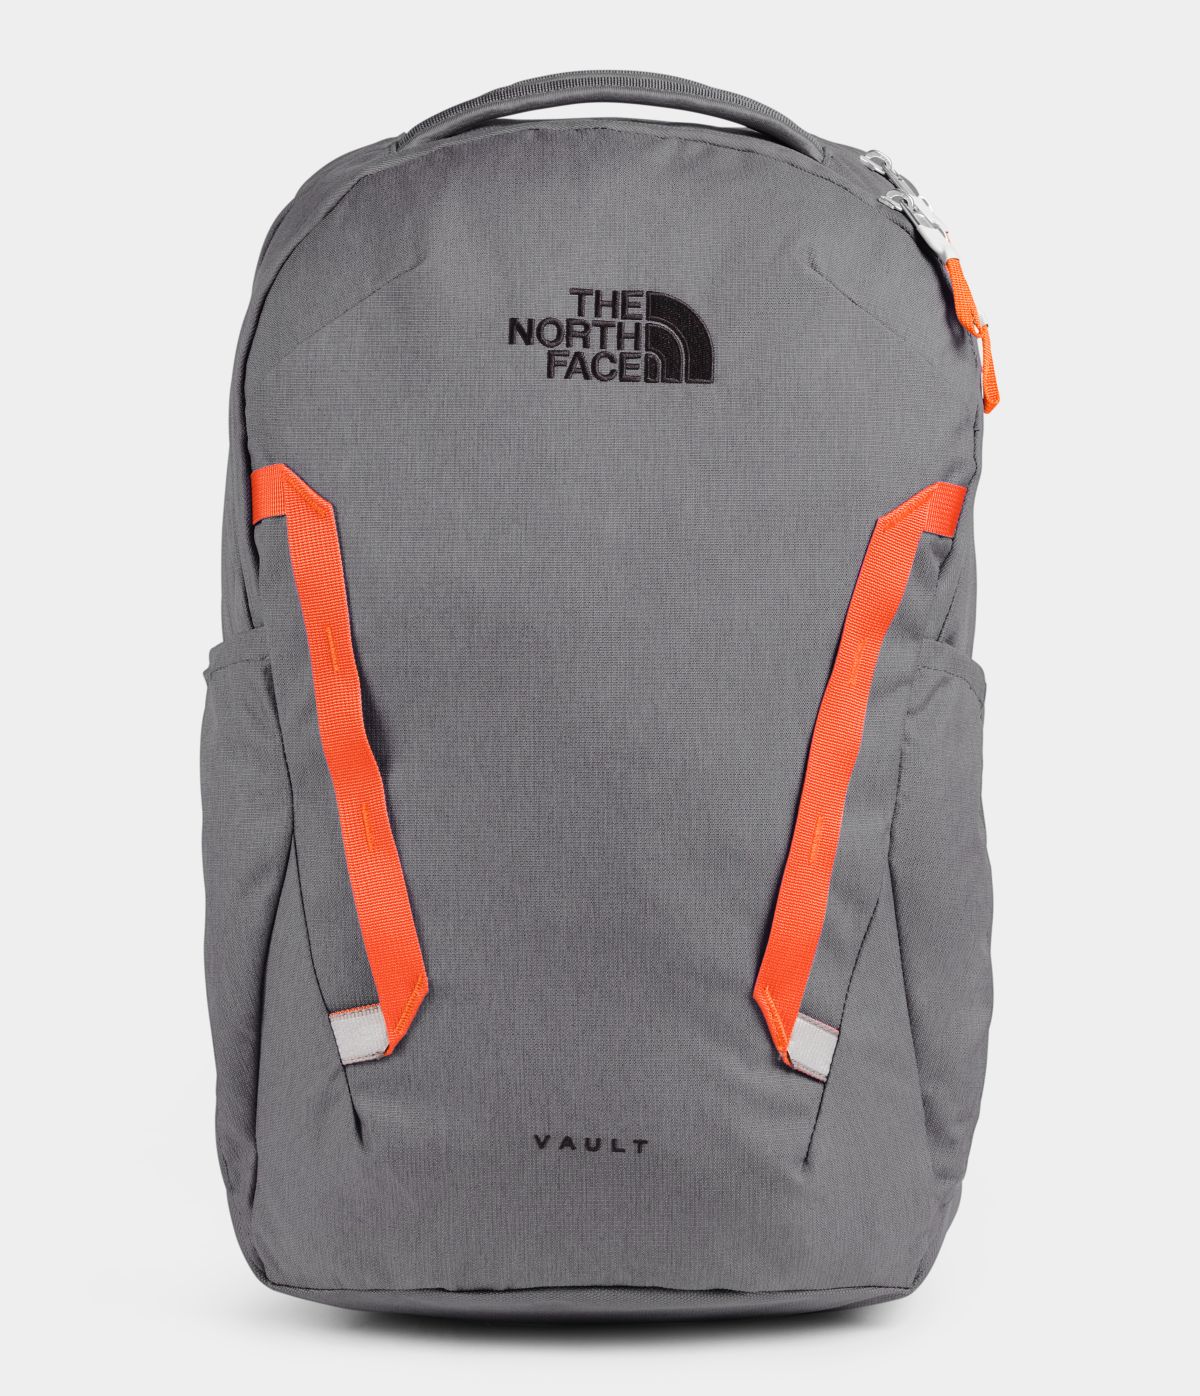 Unisex The North Face Vault Backpack in Zinc Grey Dark Heather/Persian Orange from front view